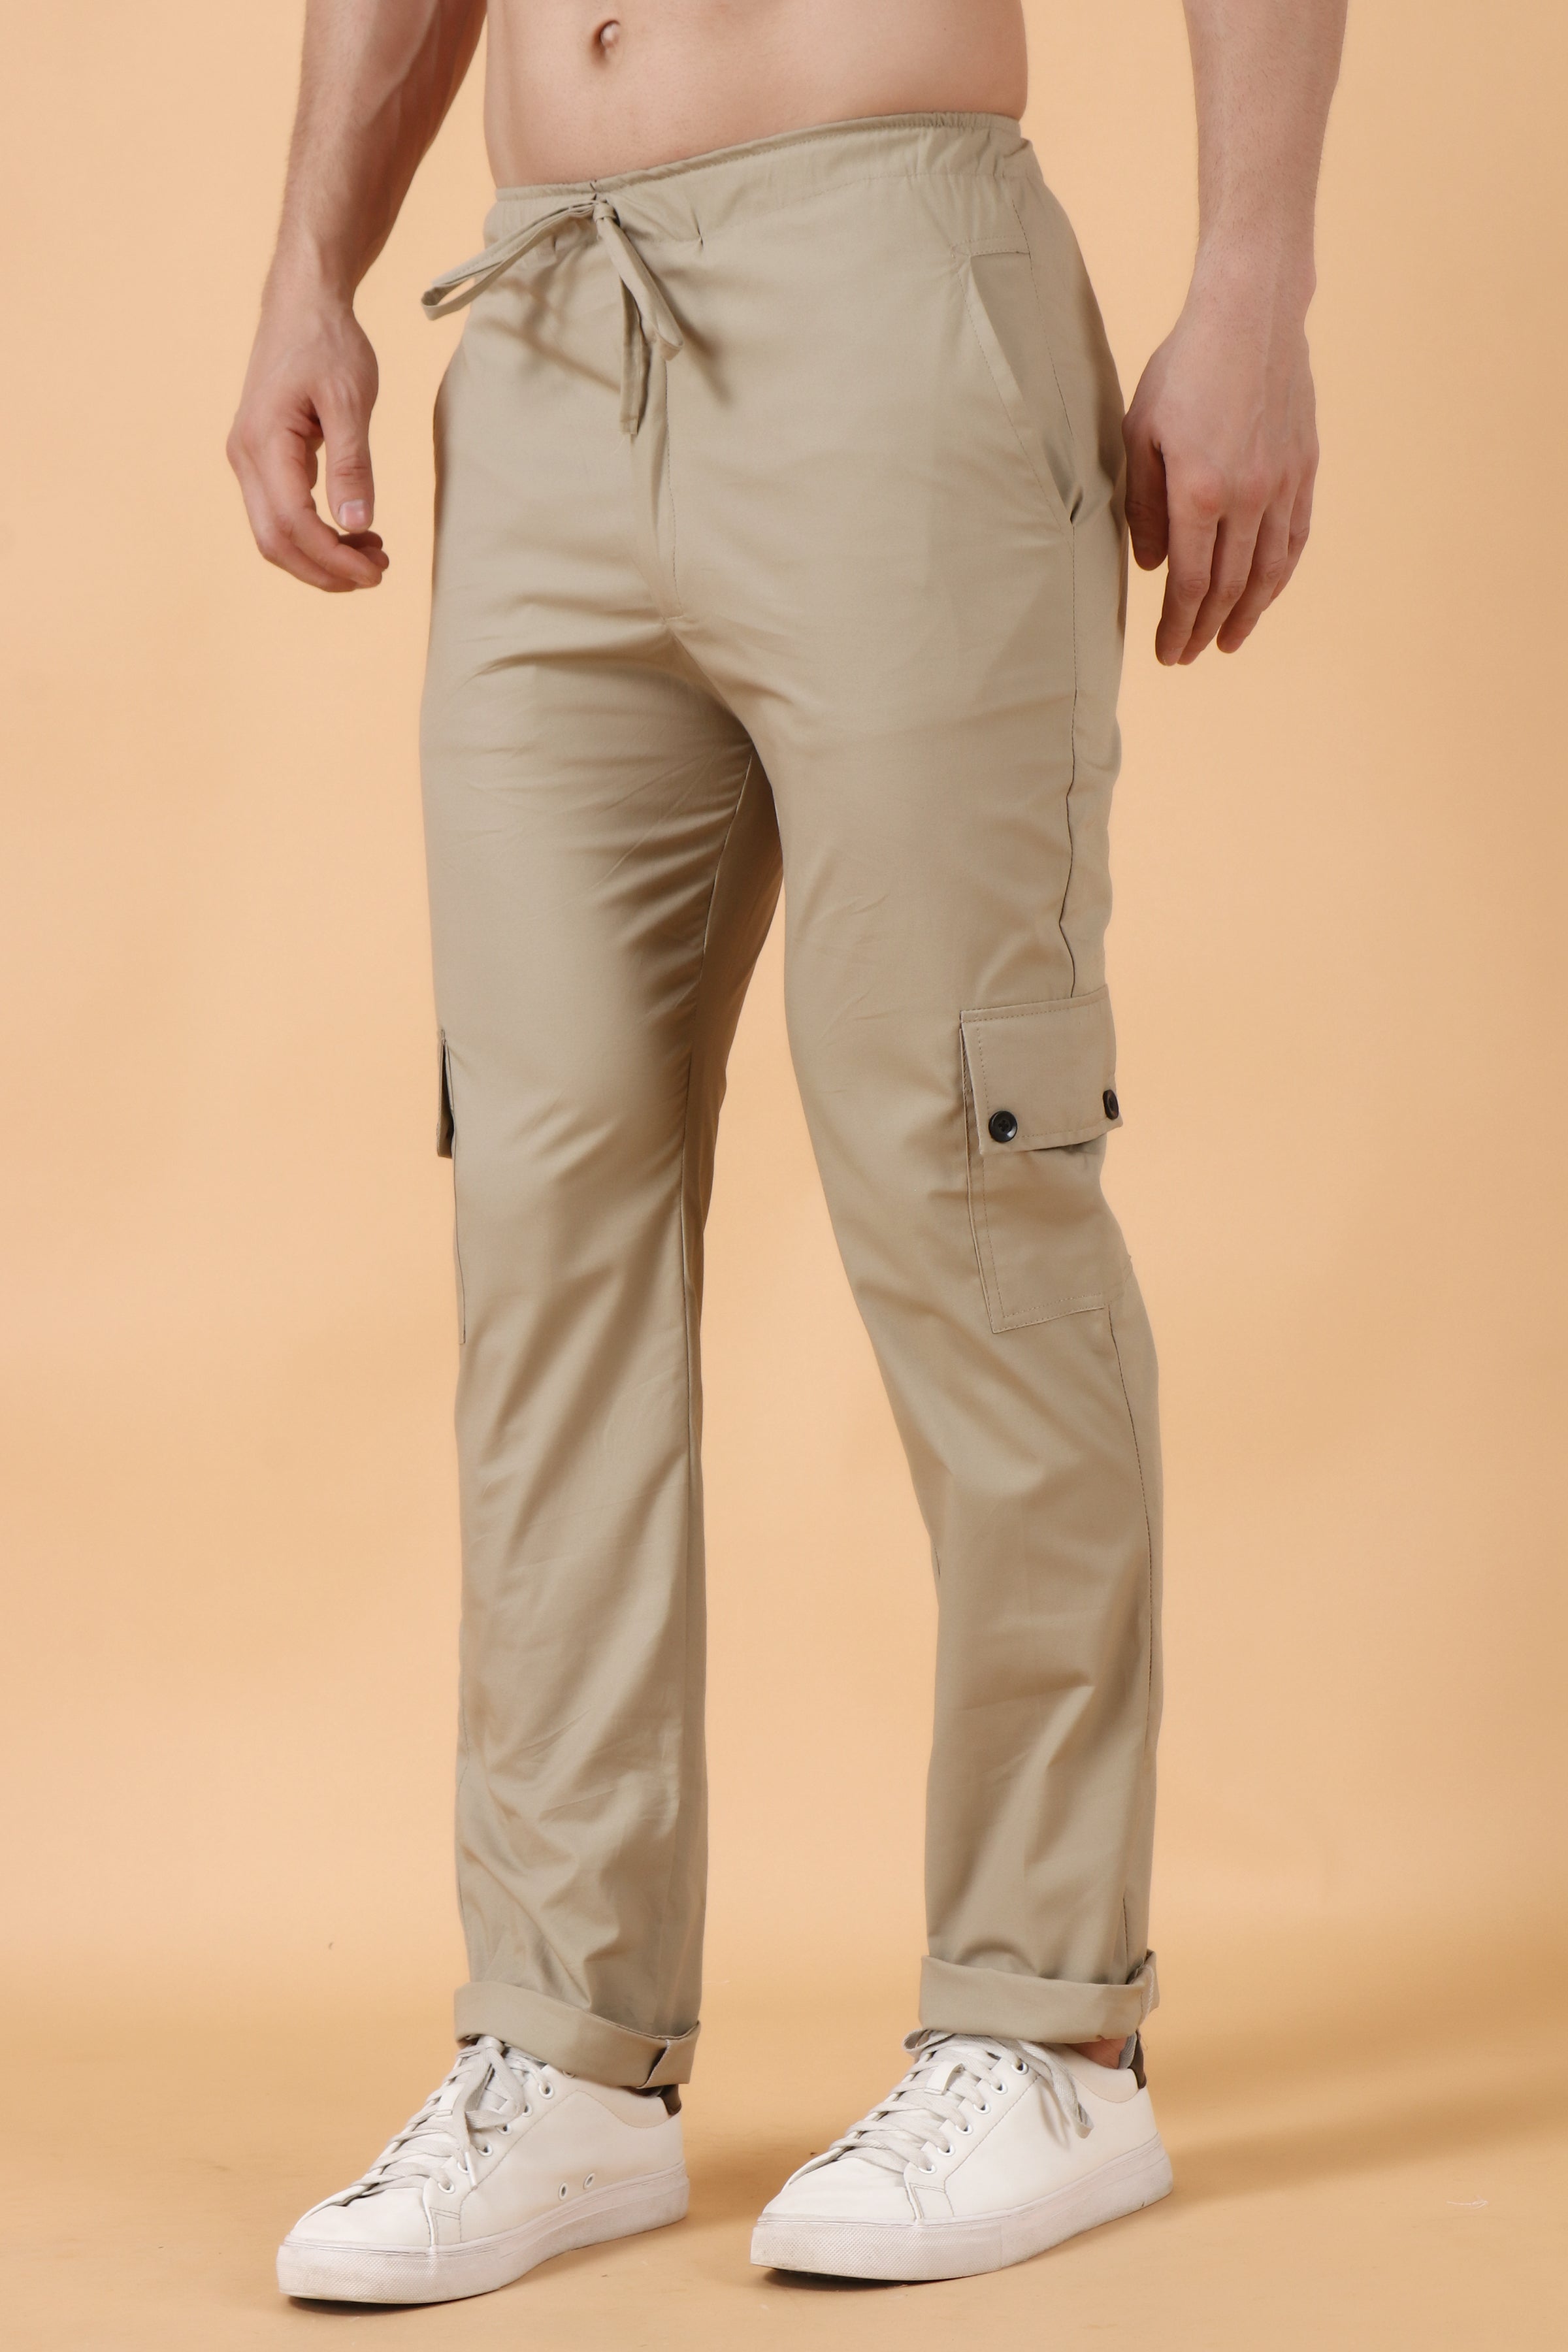 Silver Lining Stretch Cargo Pants